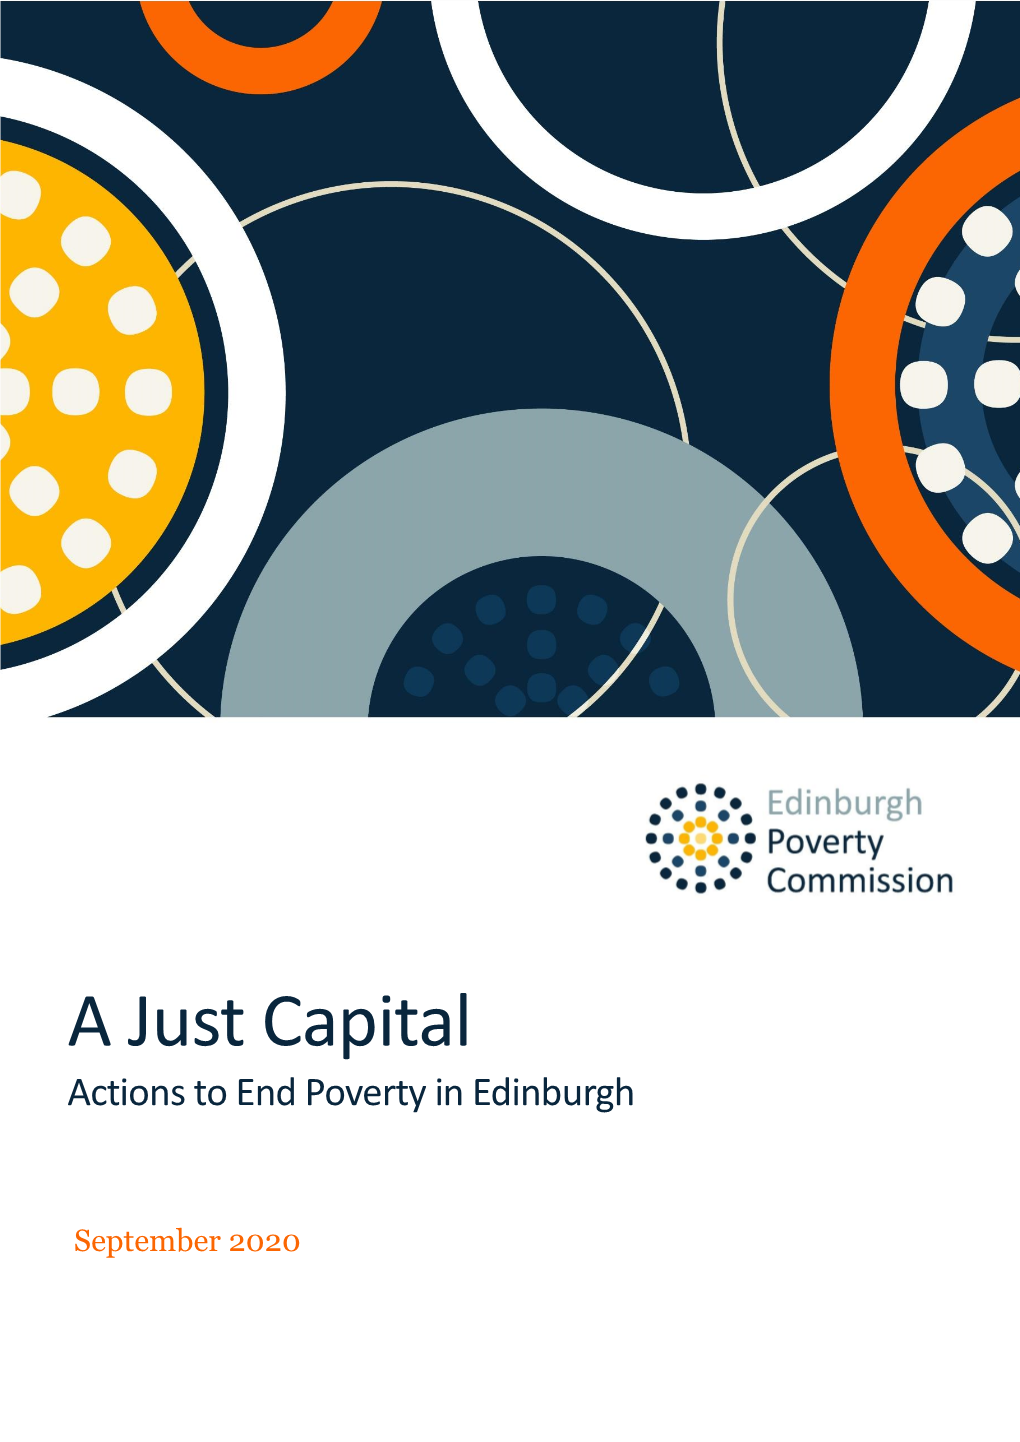 A Just Capital Actions to End Poverty in Edinburgh